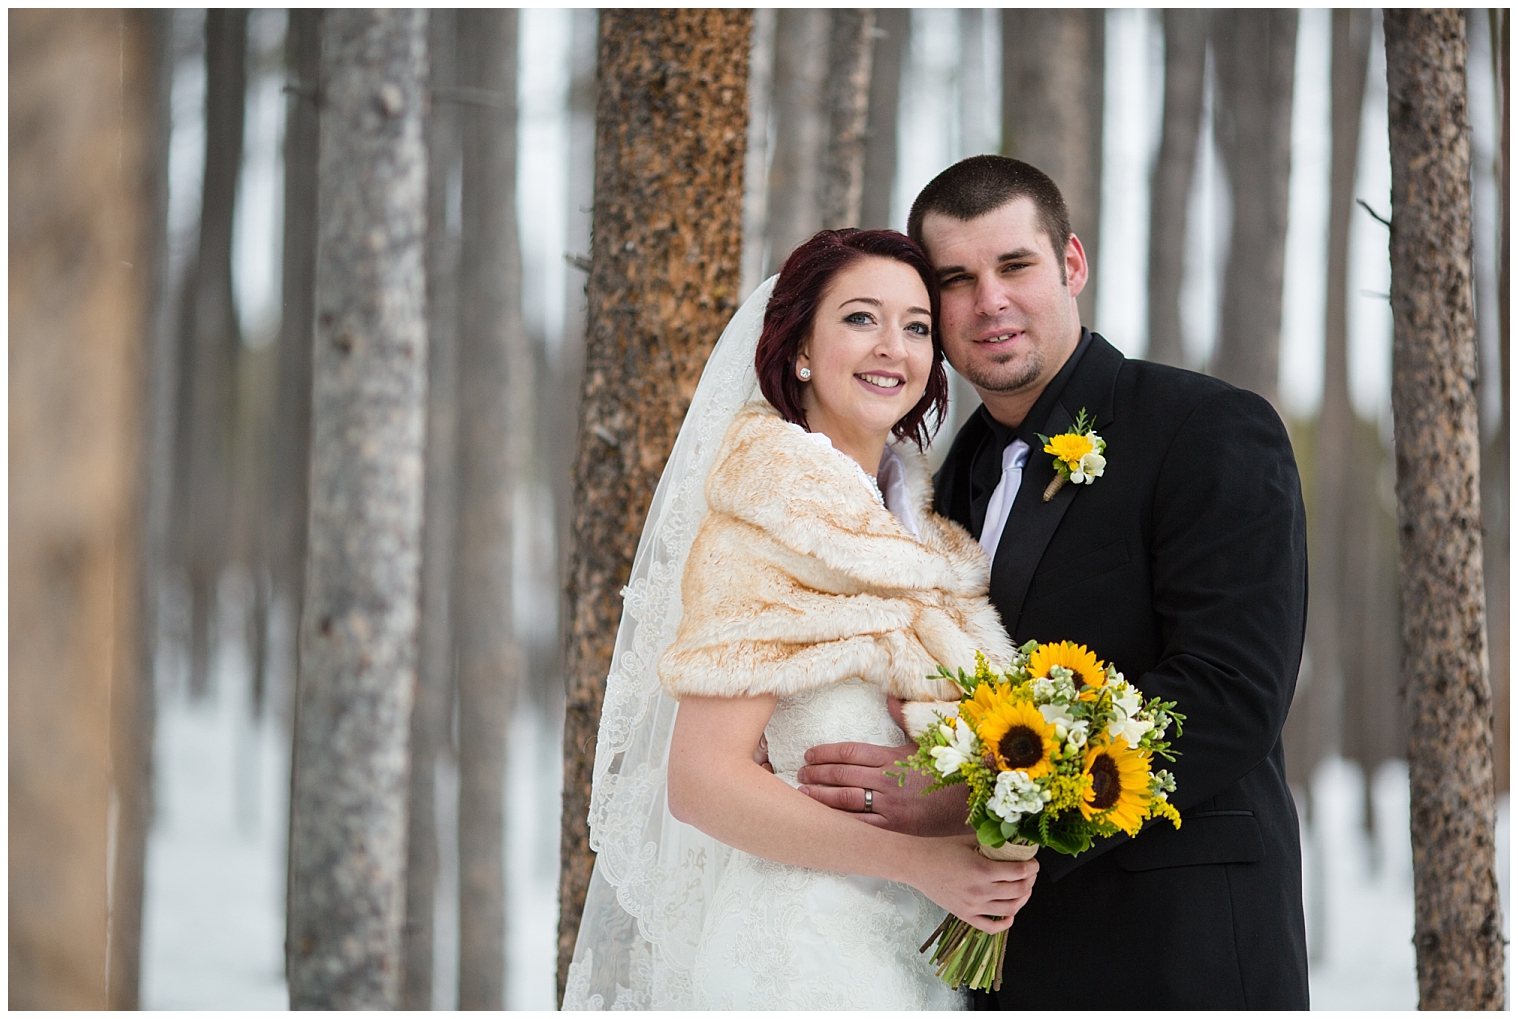 The bride and groom pose for portraits at their ski resort wedding at Sevens.